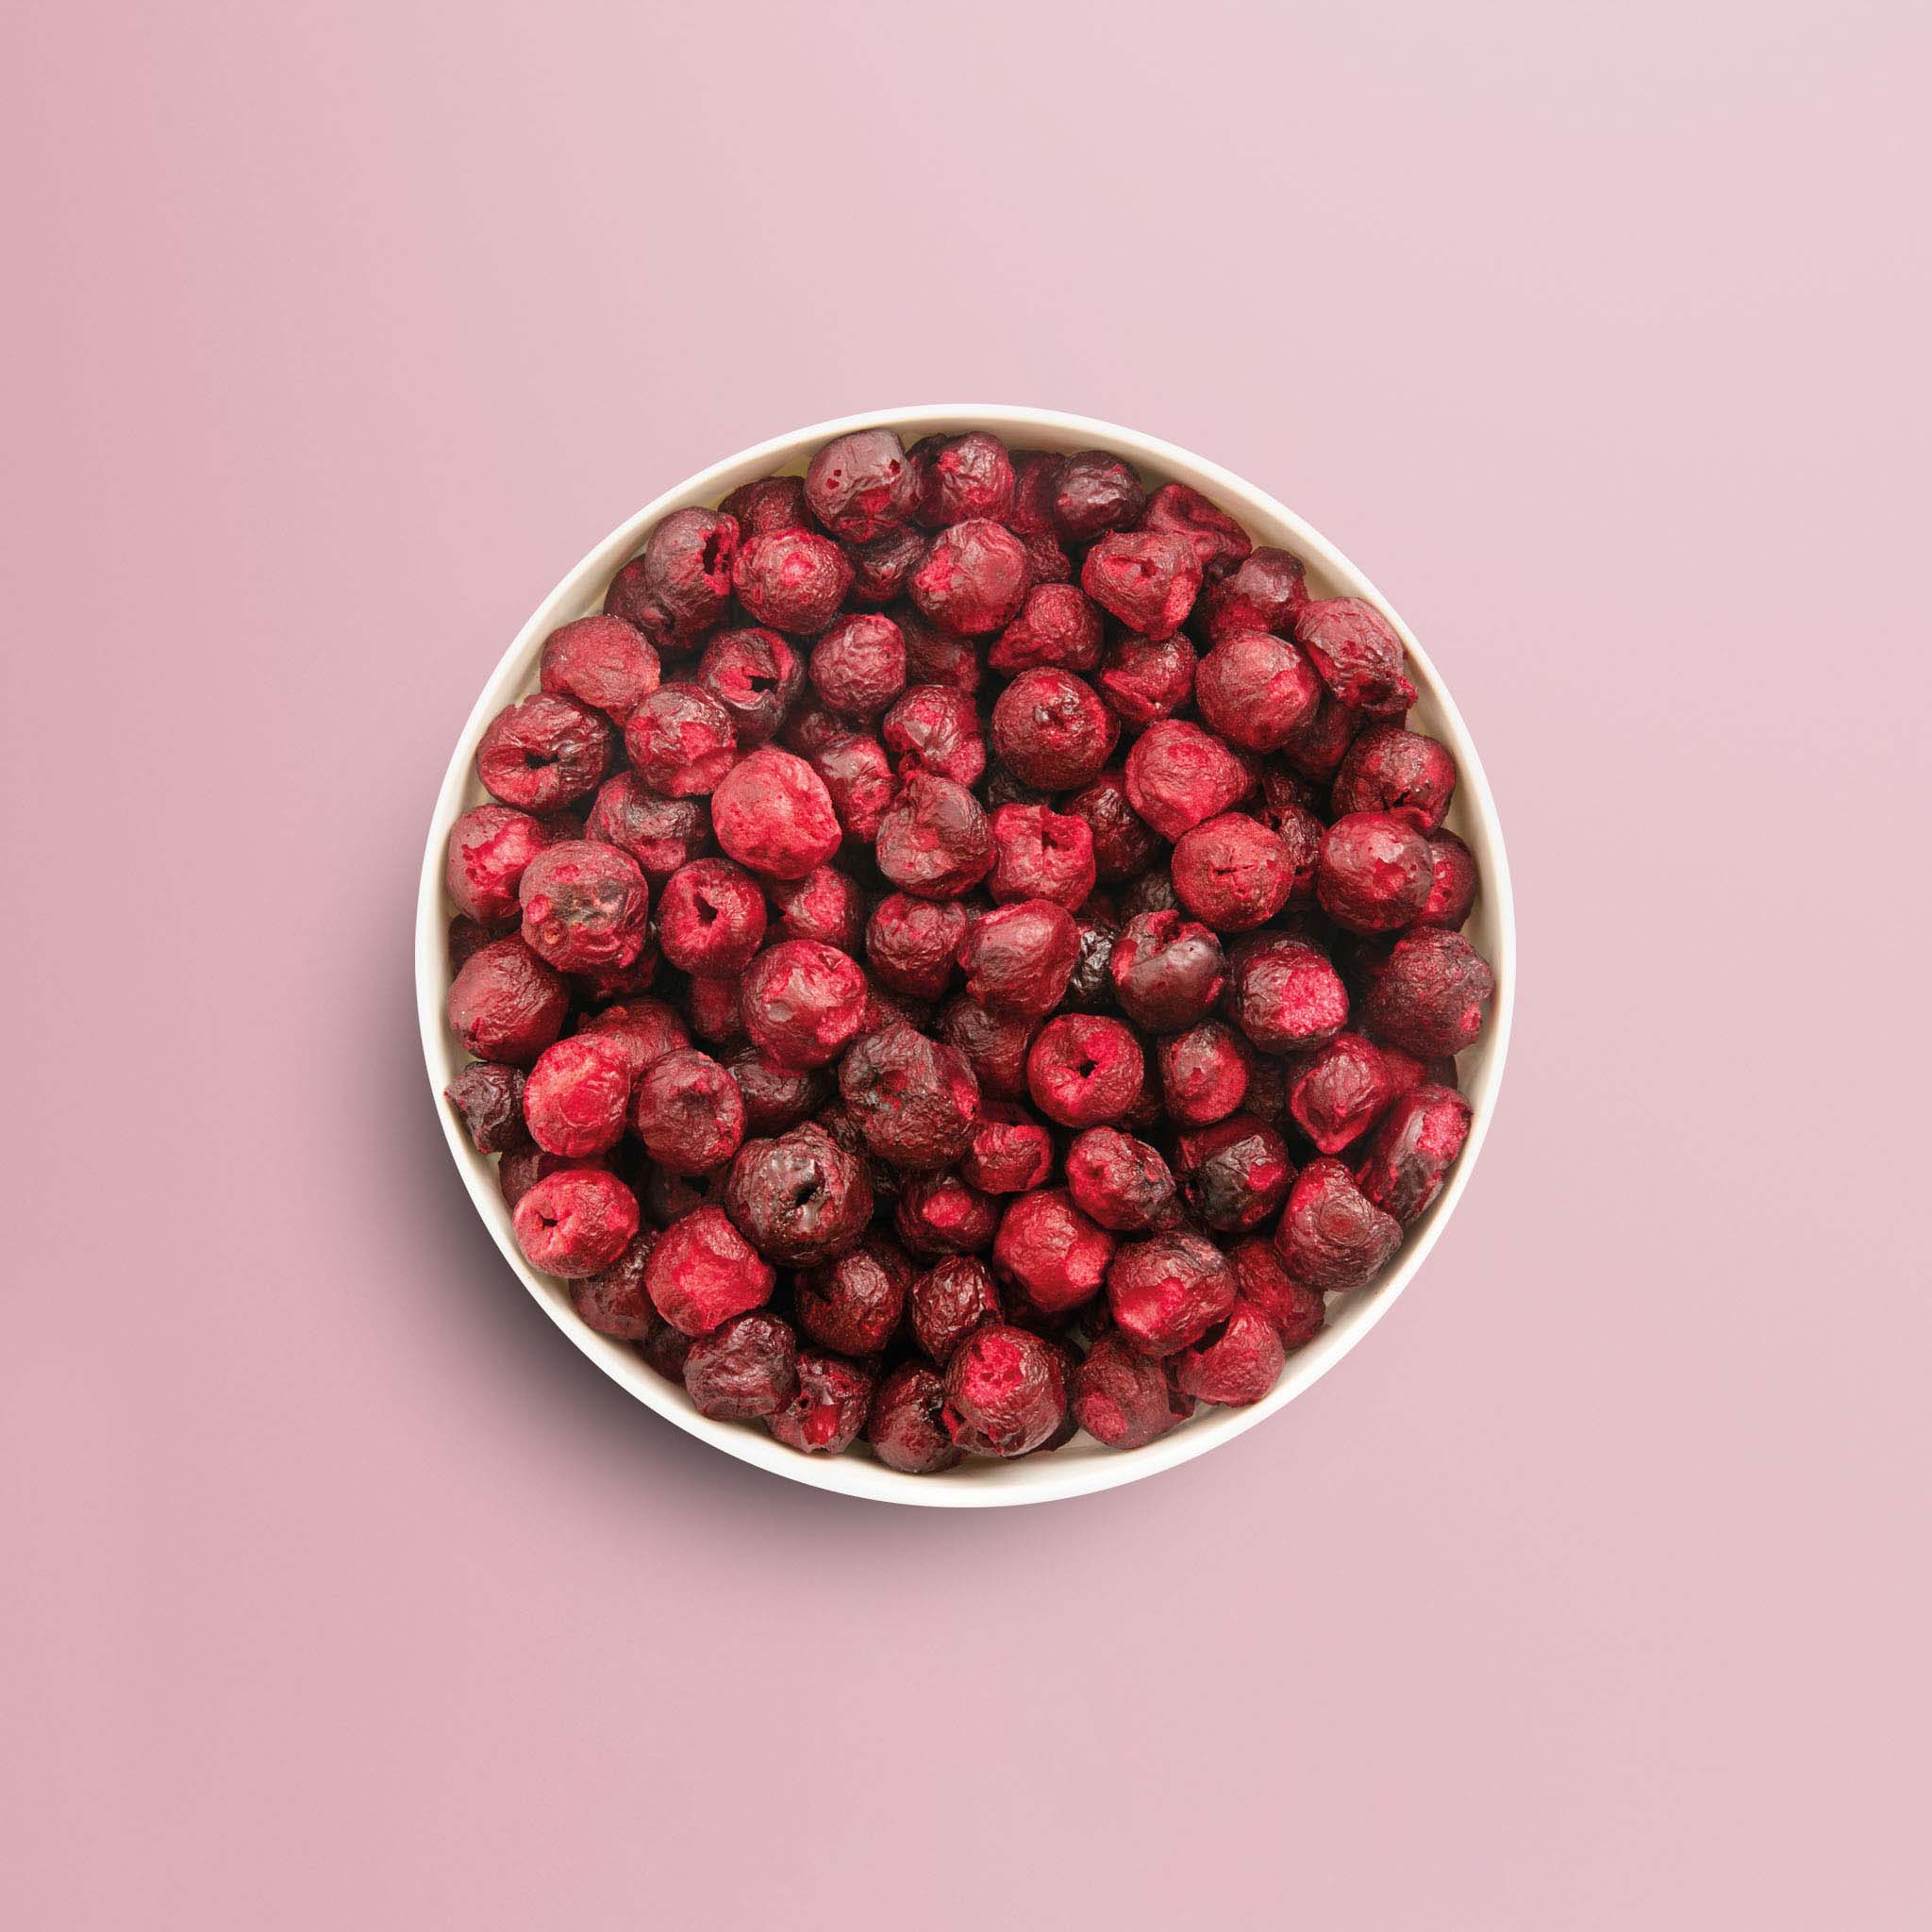 Freeze-dried sour cherries